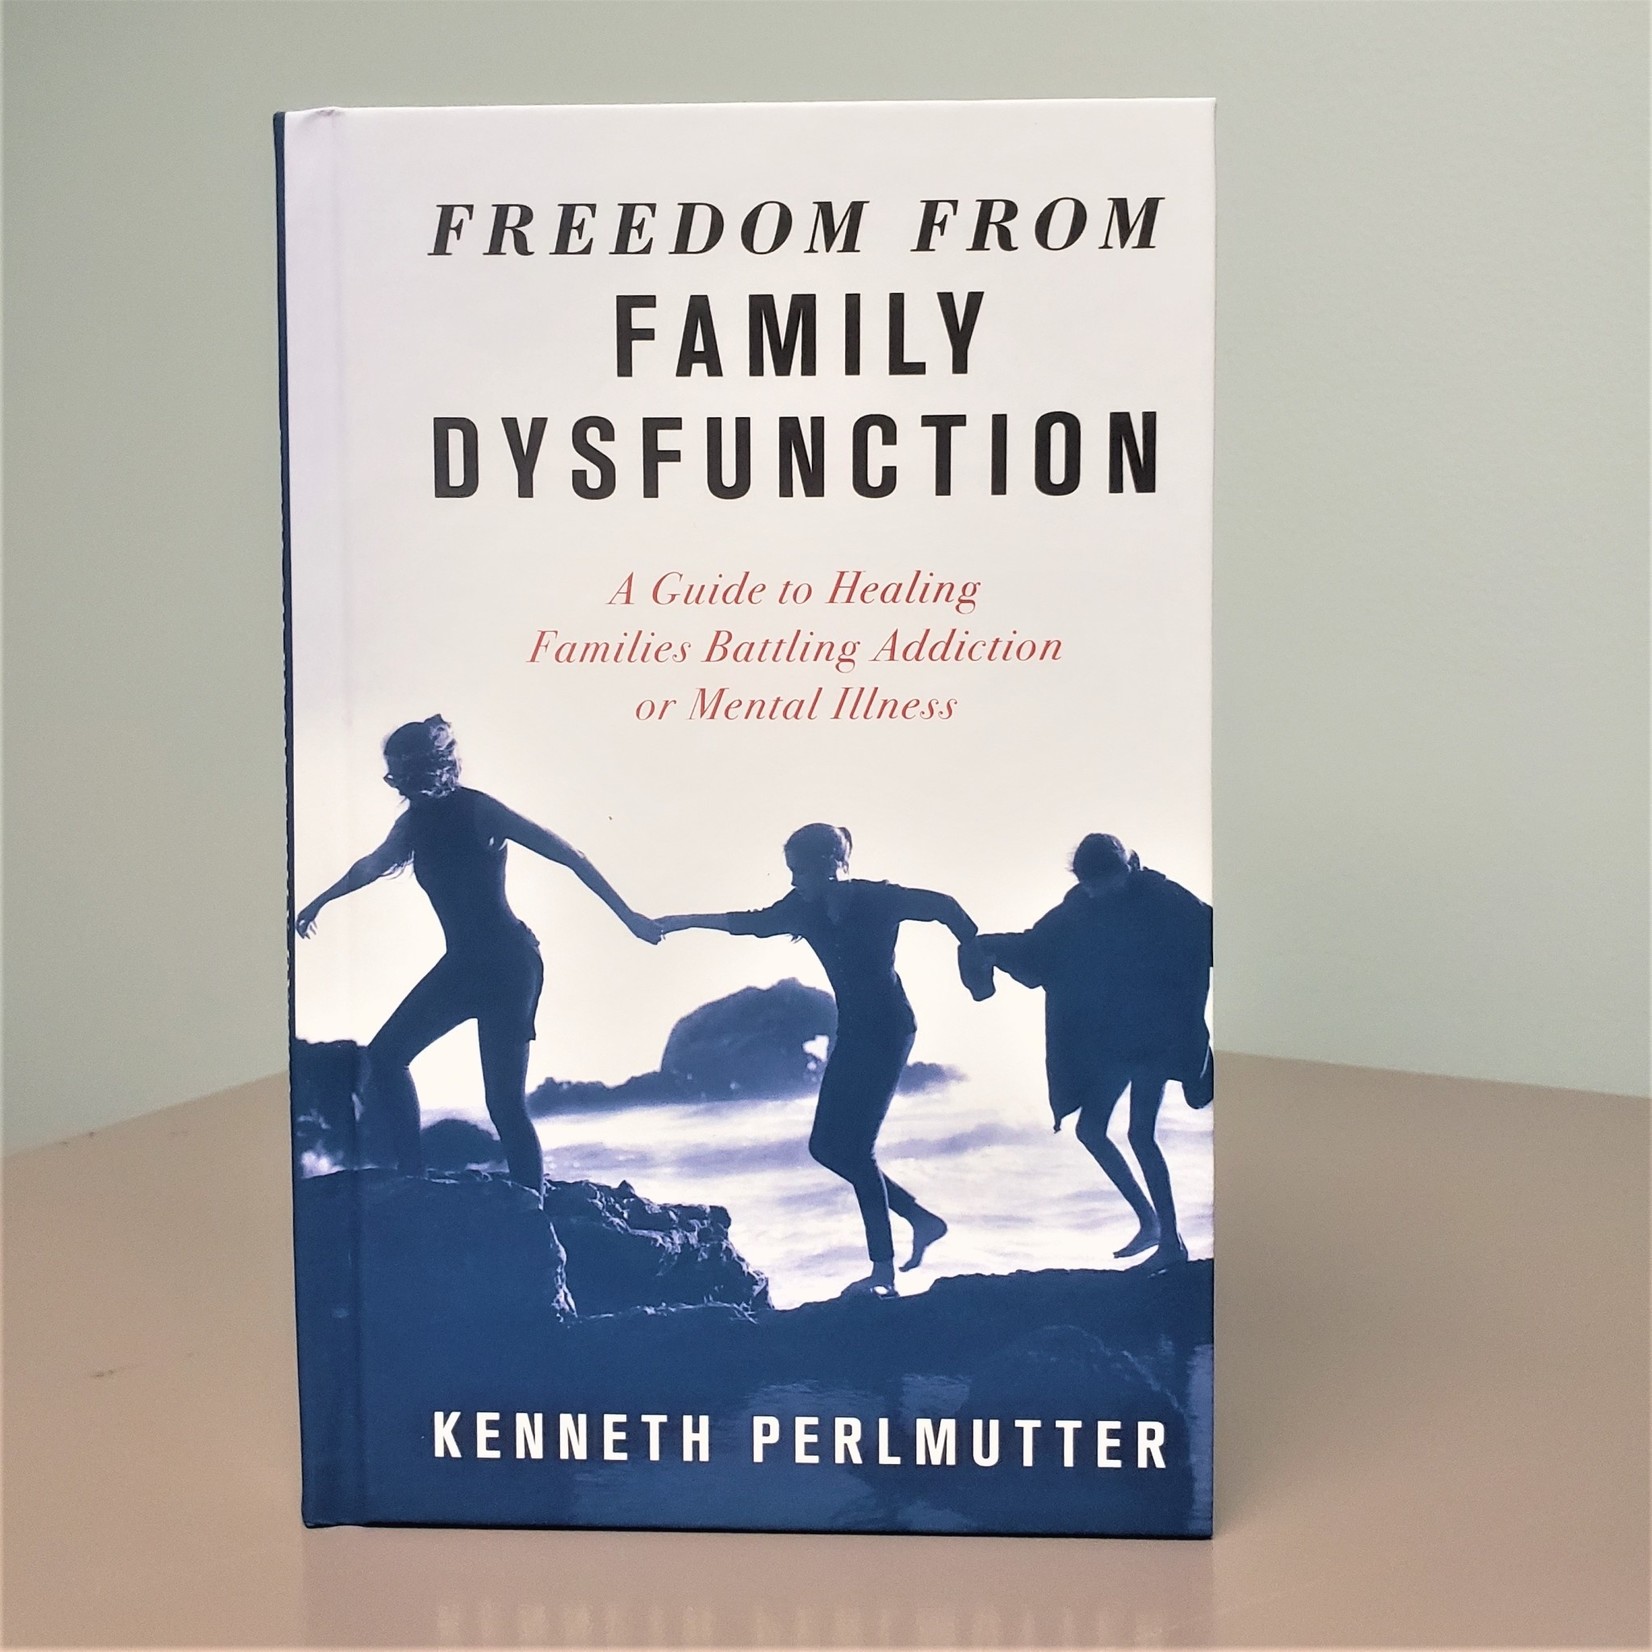 Freedom from Family Dysfunction